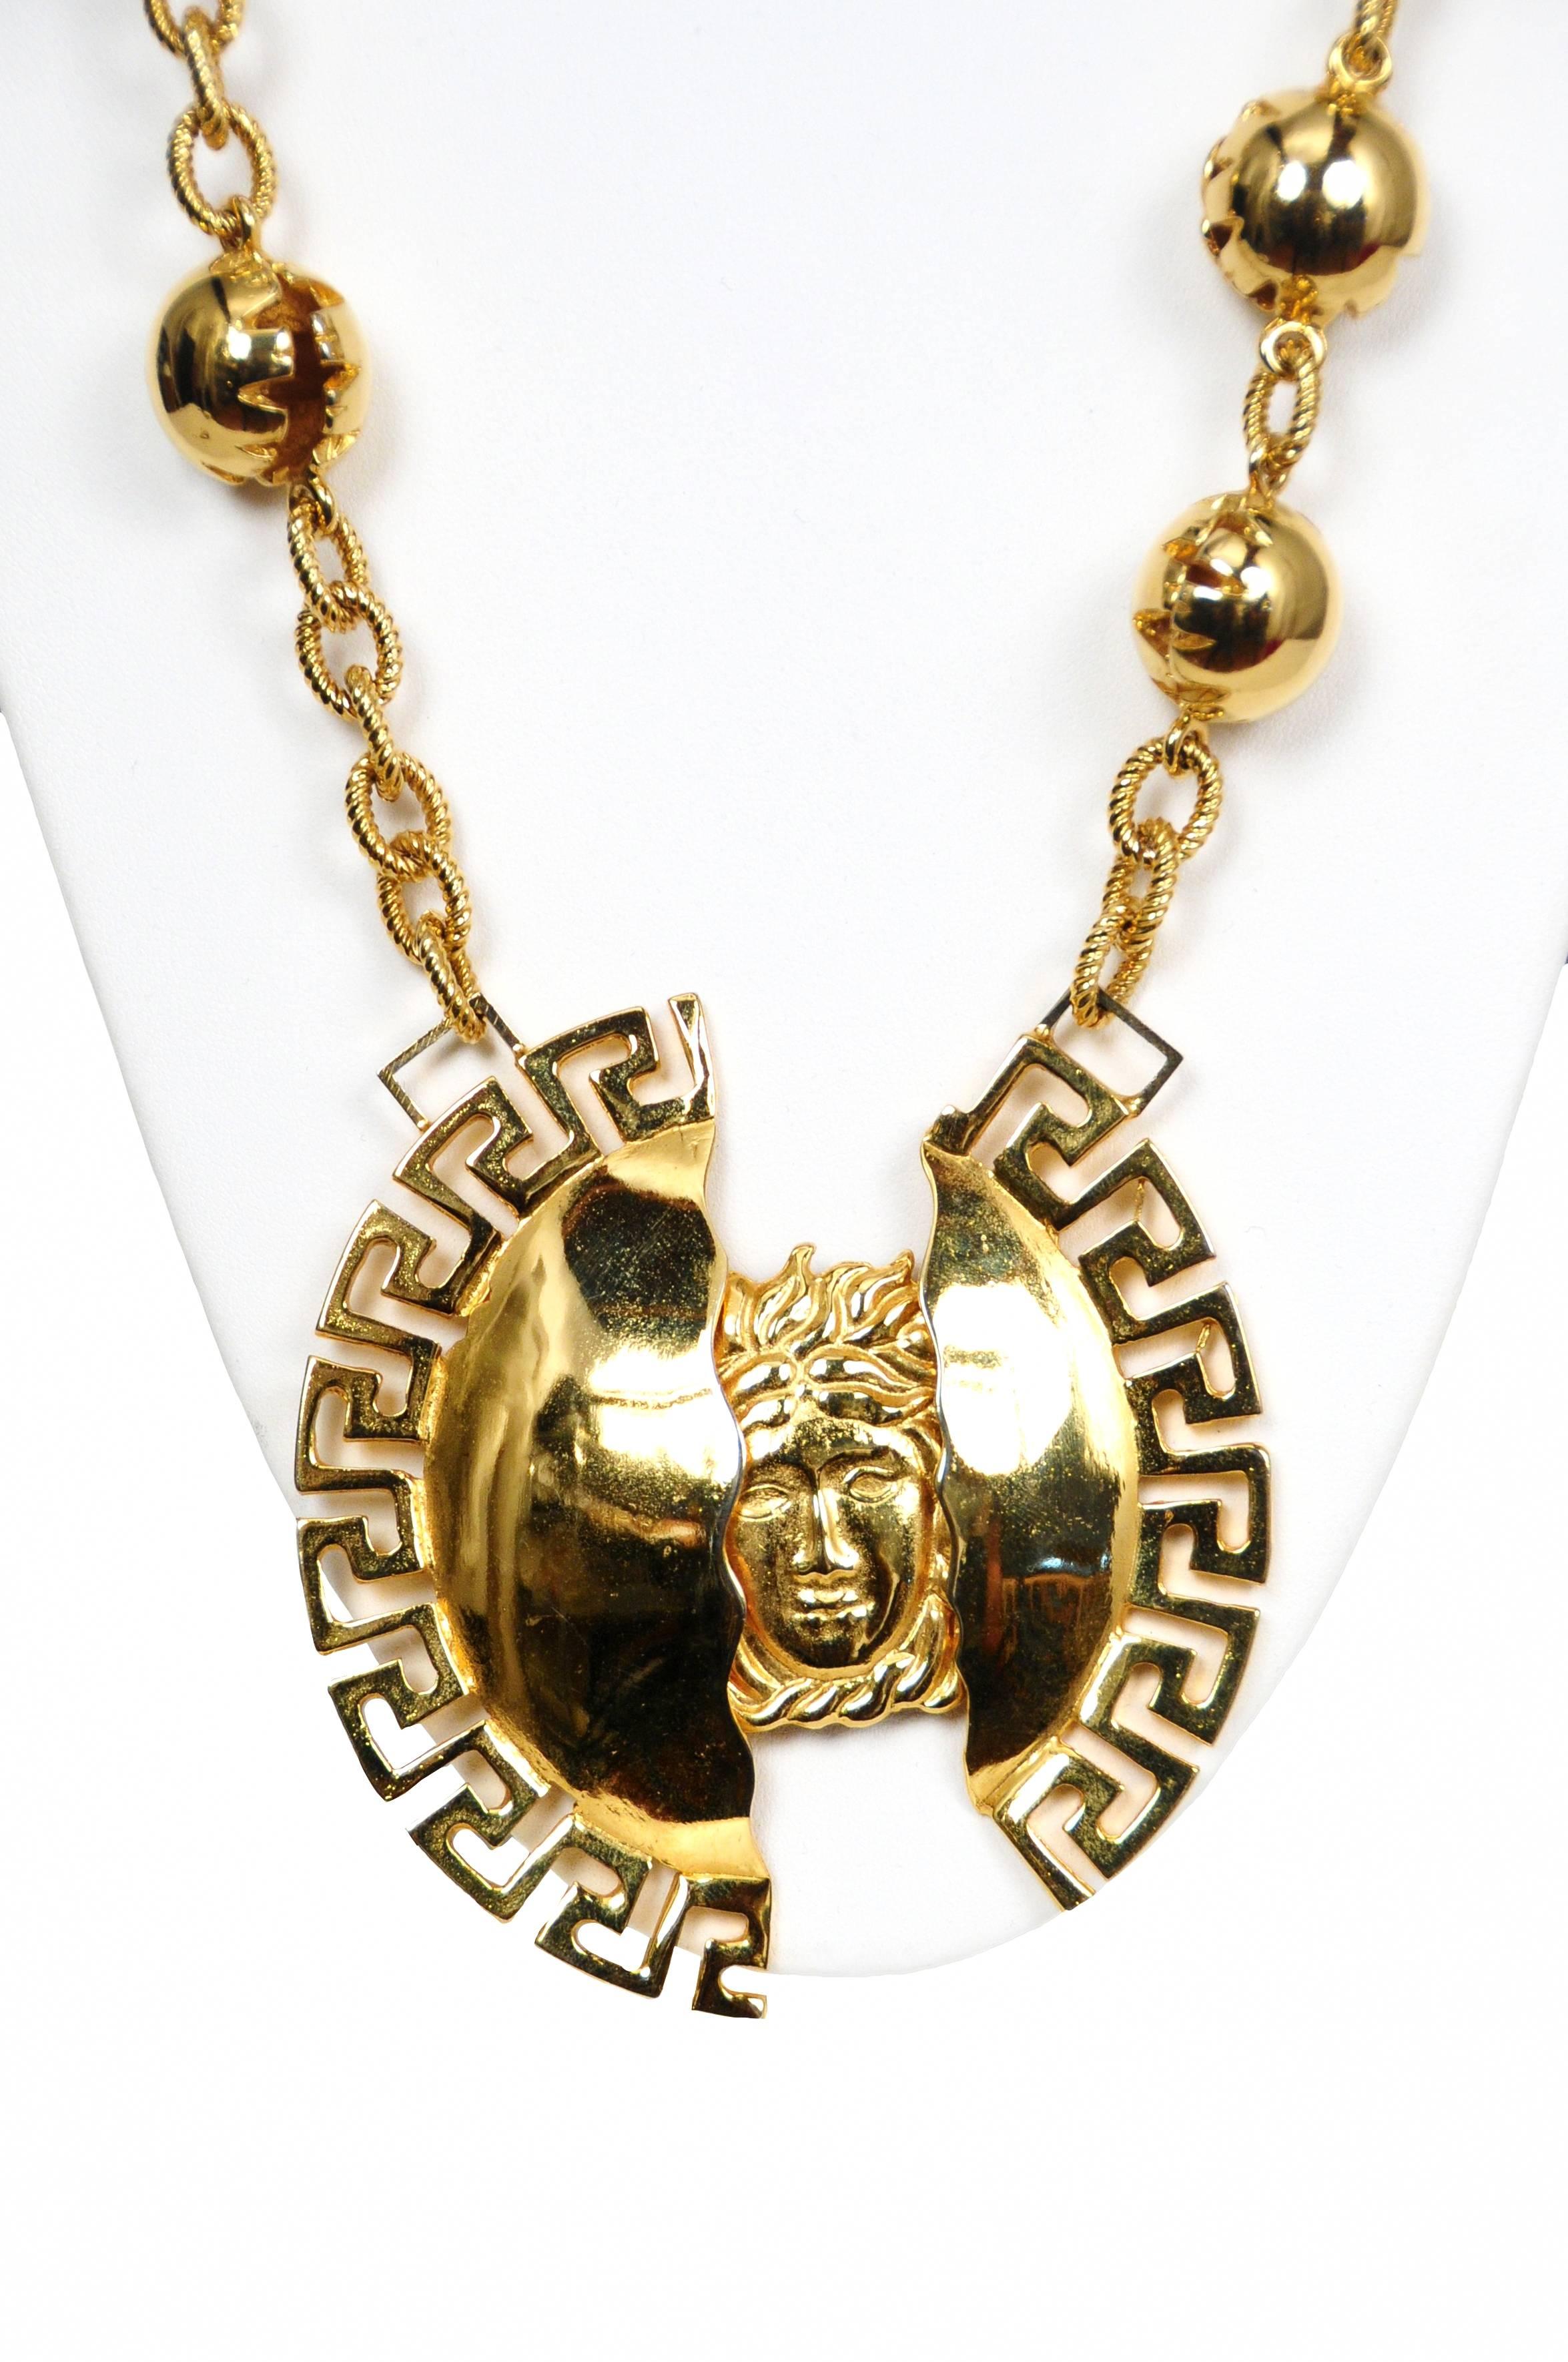 Vintage Versace gold tone necklace featuring a split fragment Medusa medallion that hangs from a gold tone chain interspersed with gold balls.